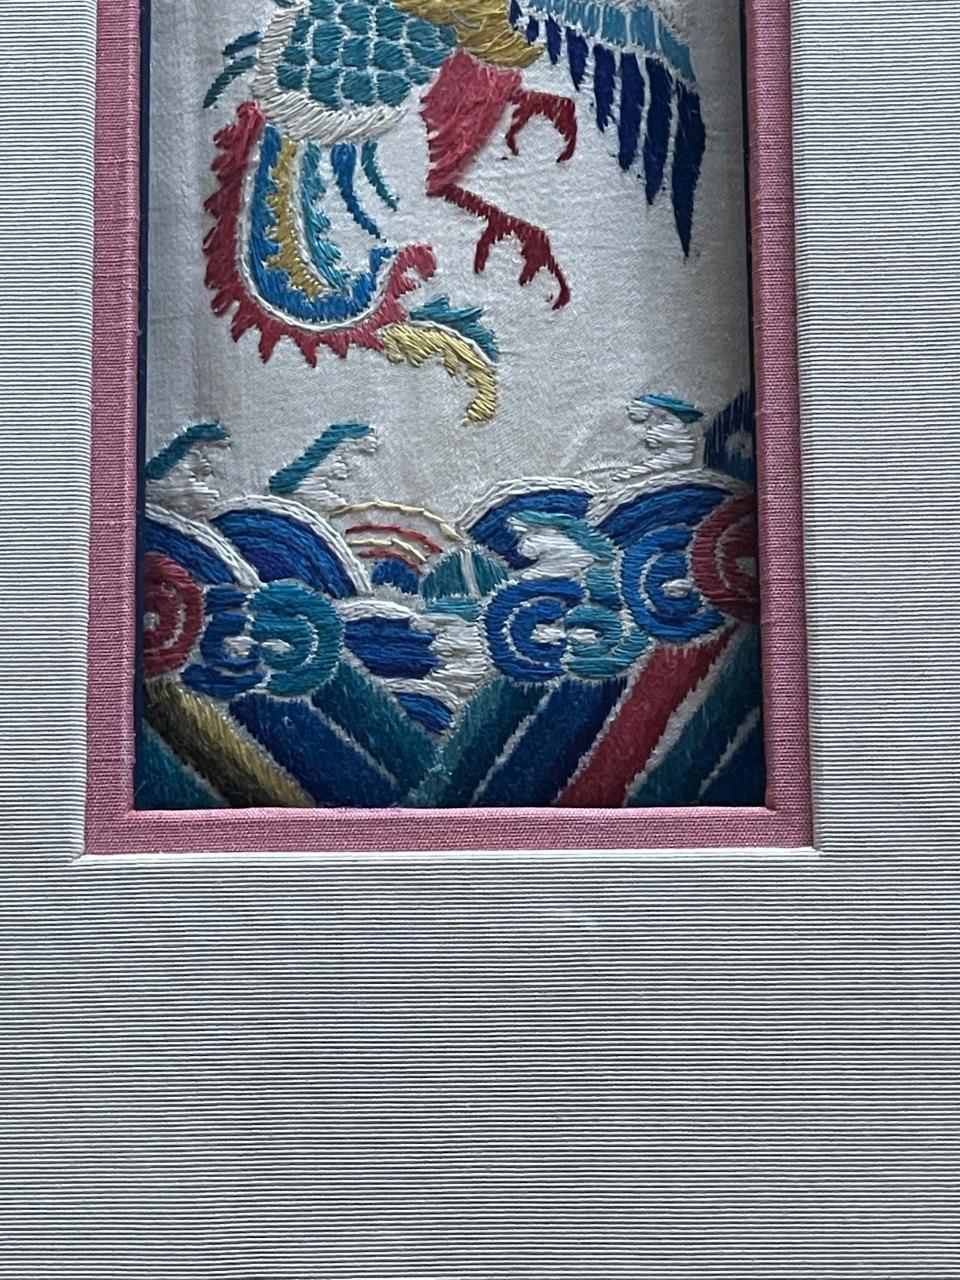 Chinese Export Framed Antique Embroidery Chinese Textile Qing Dynasty Provenance For Sale